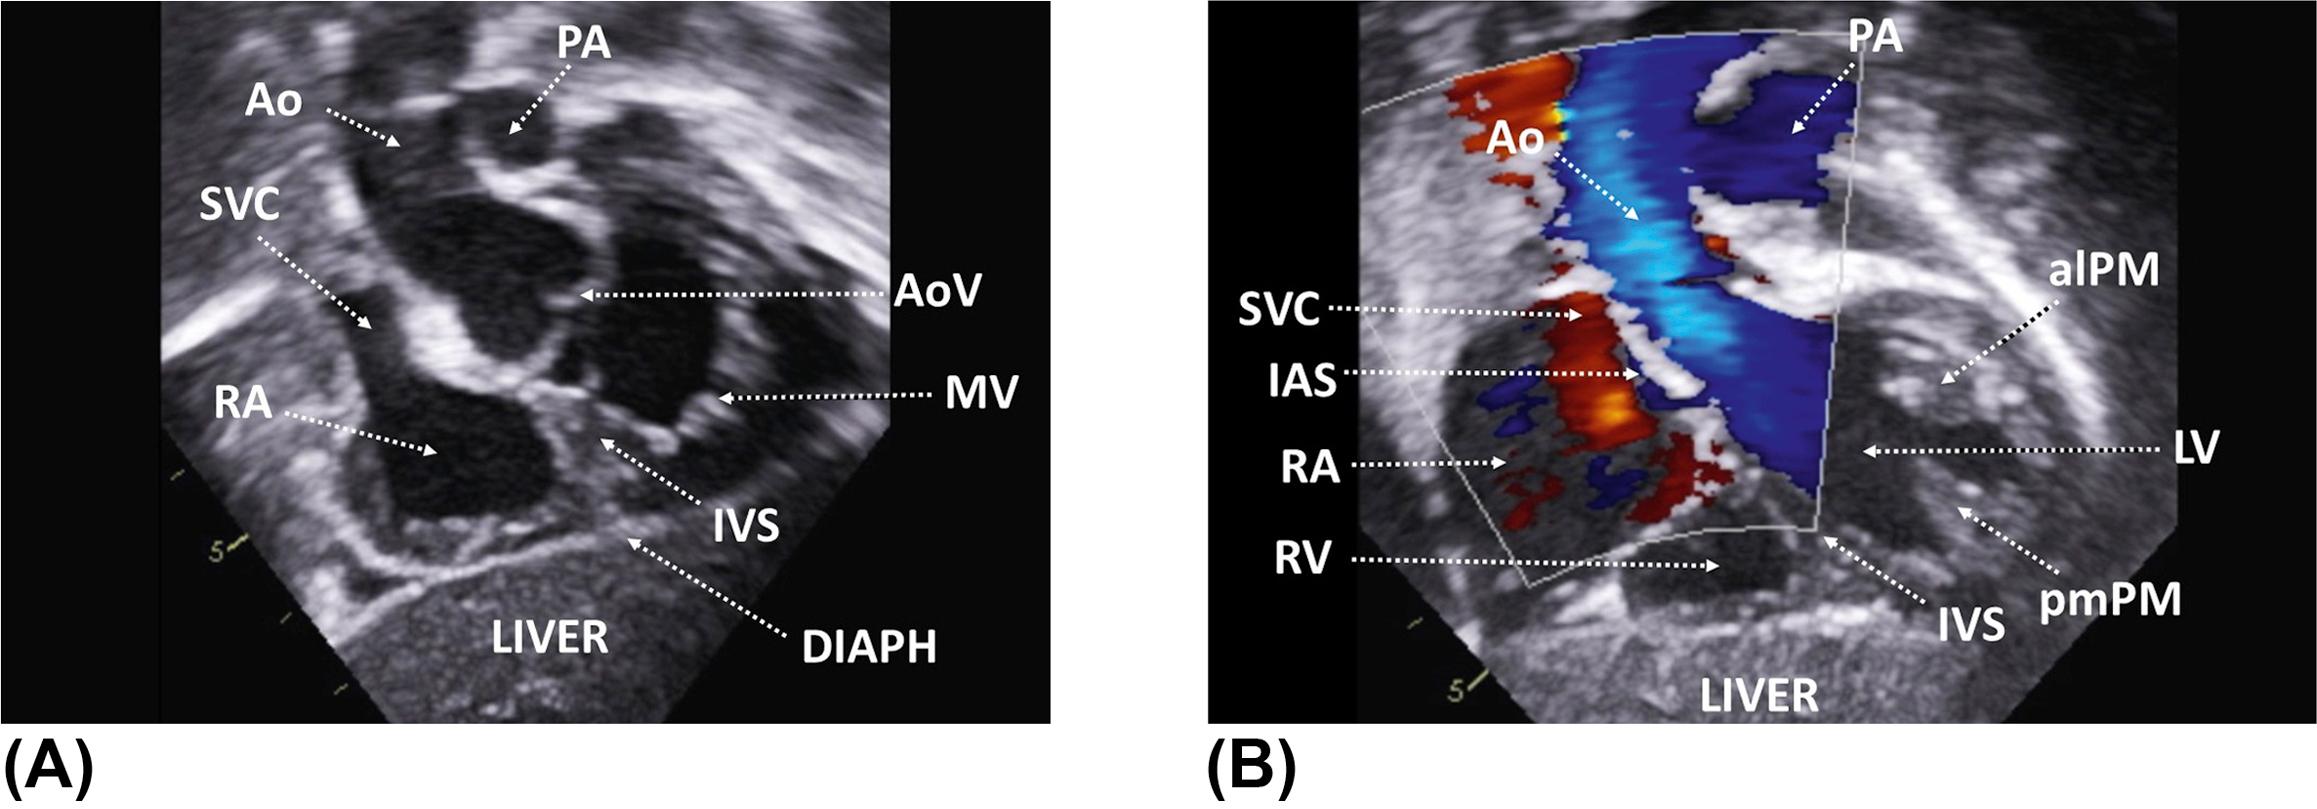 Figure 6, (A) Subcostal long-axis view showing the entire left ventricular outflow tract with the proximal ascending aorta. (B) Corresponding color flow Doppler. (C) The probe is further angulated inferiorly as compared to the previous figure. The marker remains at the 3 o'clock position. alPM , anterolateral papillary muscle; Ao , aorta; DIAPH , diaphragm; IAS , interatrial septum; IVS , interventricular septum; LV , left ventricle; MV , mitral valve; PA , pulmonary artery; pmPM , posteromedial papillary muscle; RA , right atrium; RV , right ventricle; SVC , superior vena cava.